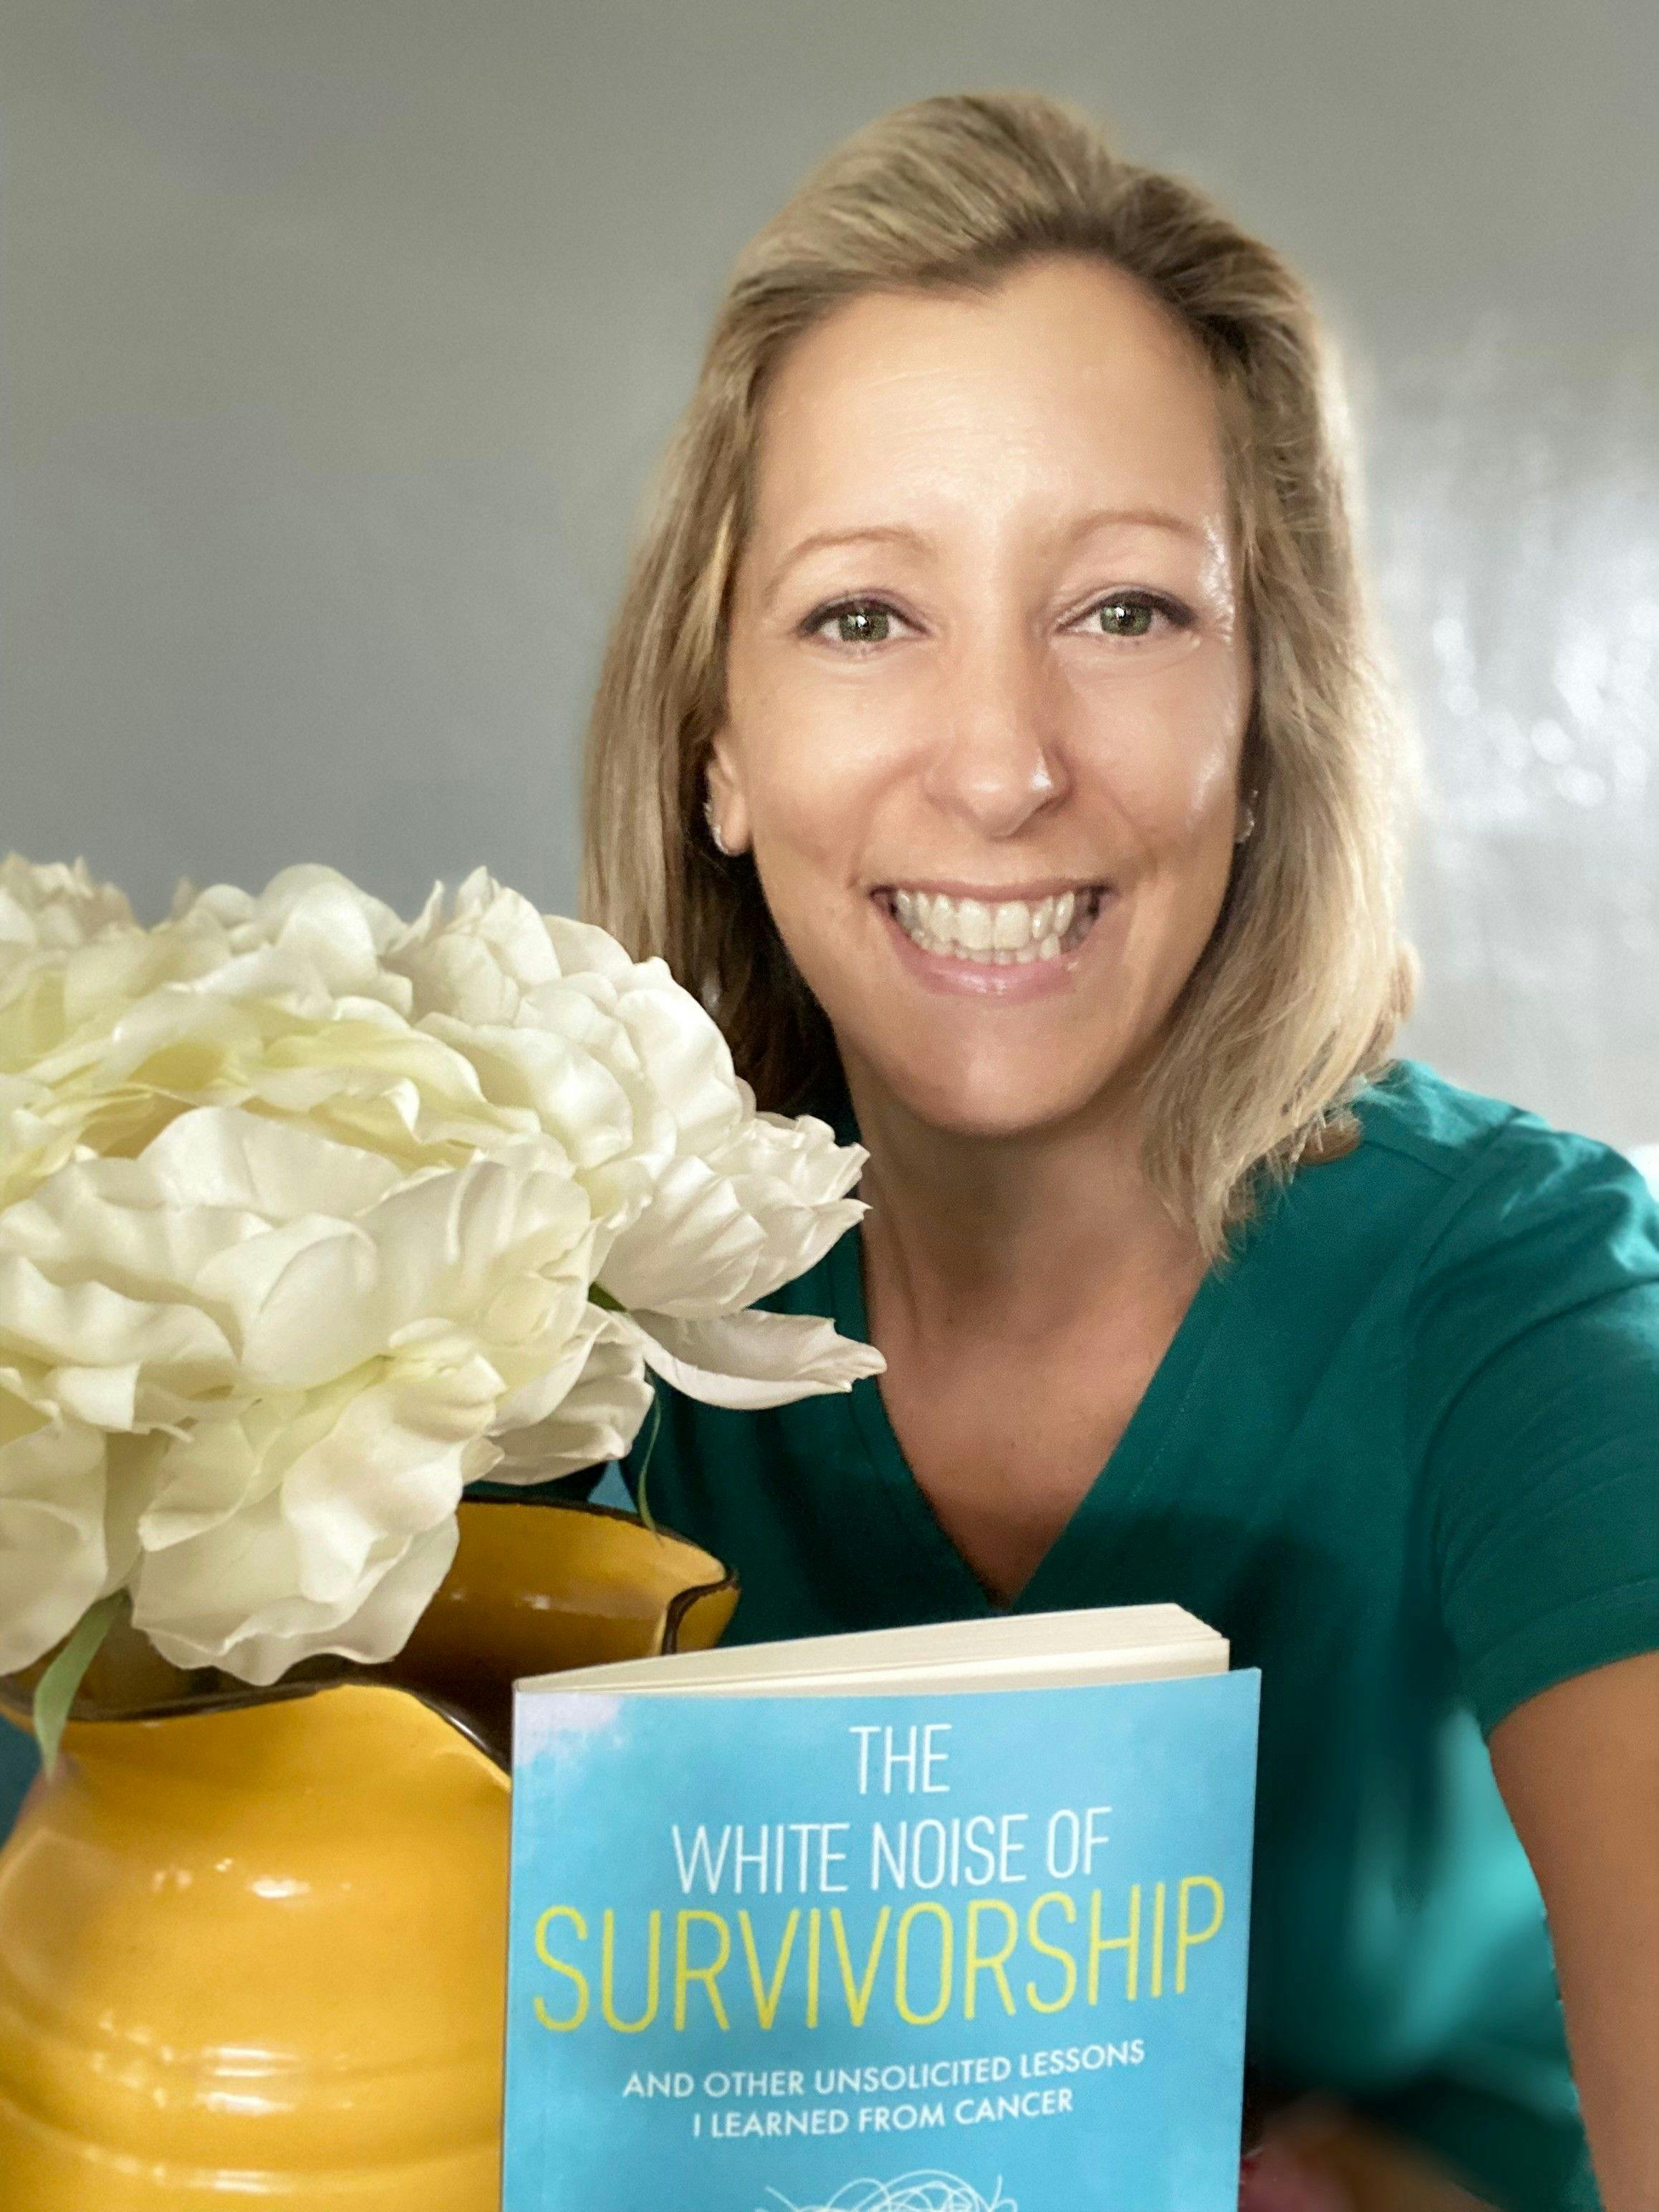 Cancer Survivor Tara Rolle holding a copy of her book, "The White Noise of Survivorship and Other Unsolicited Lessons I Learned From Cancer"